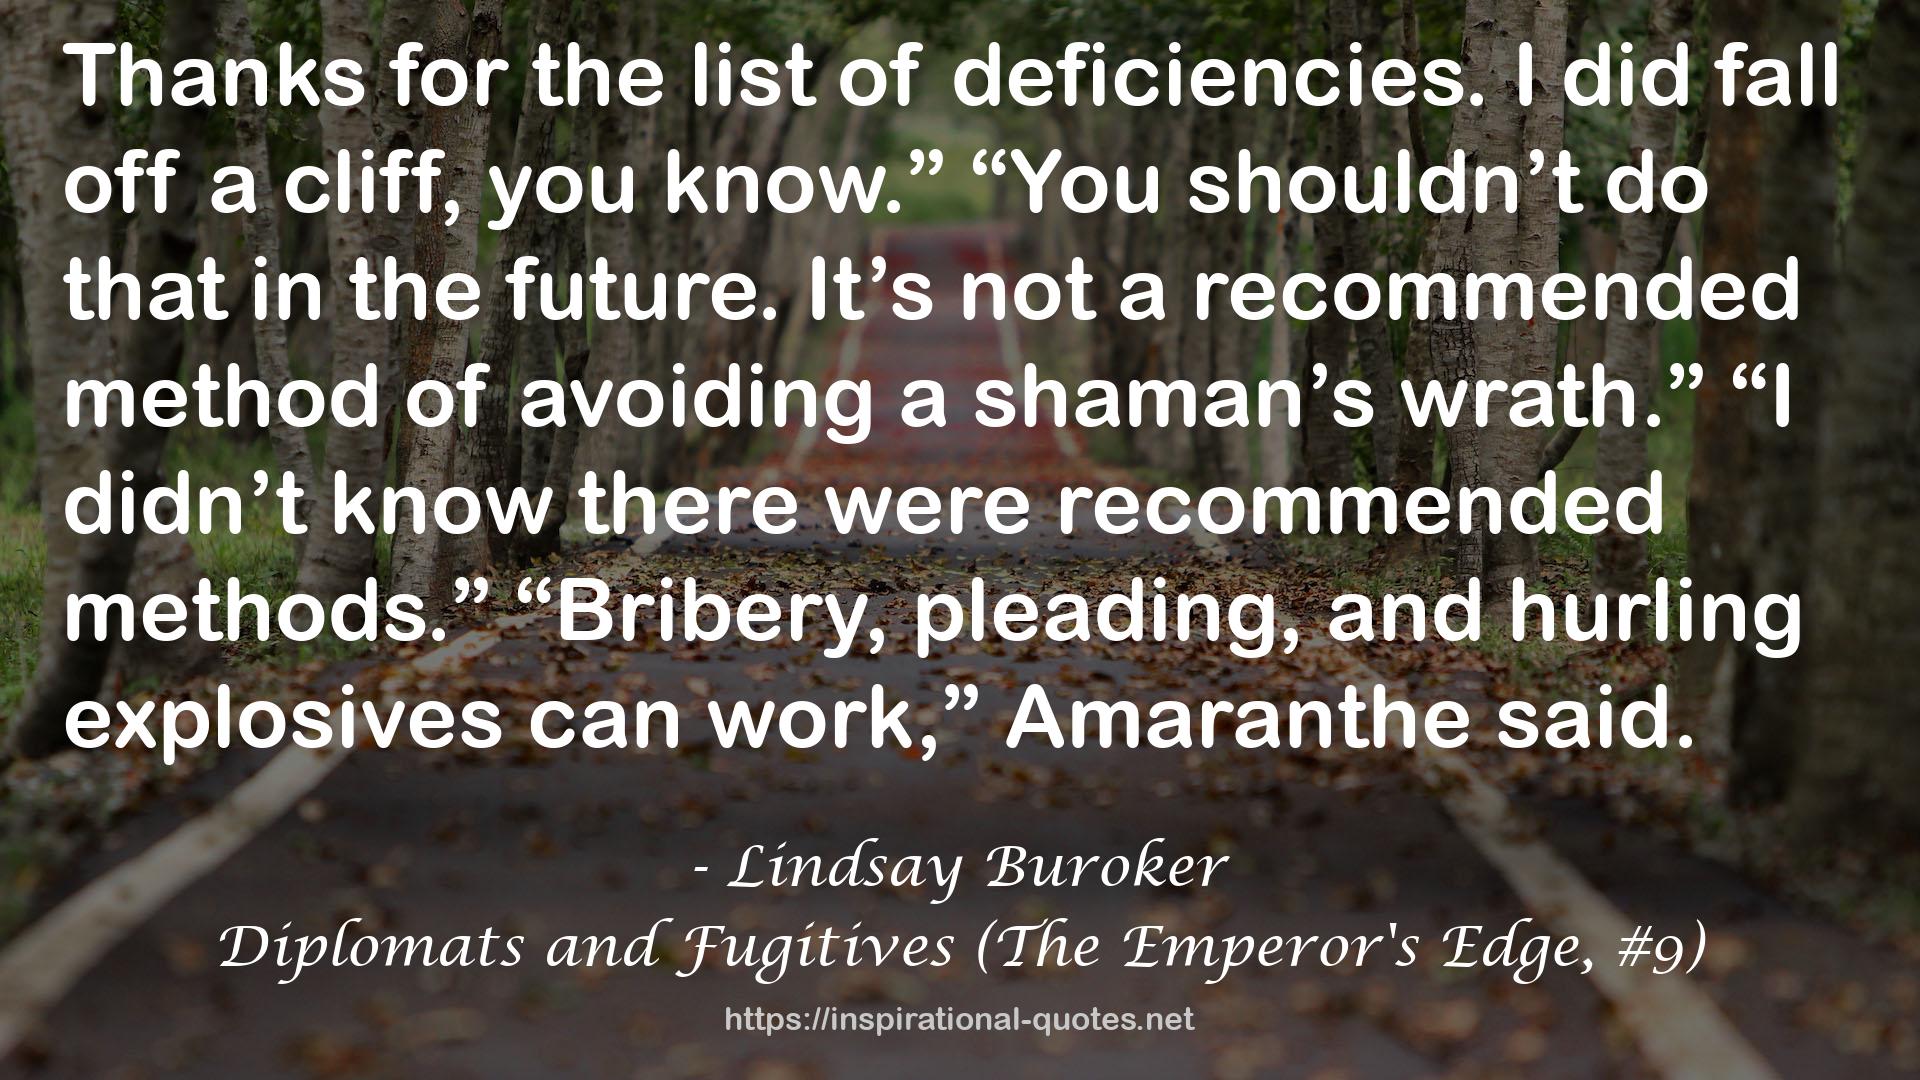 Diplomats and Fugitives (The Emperor's Edge, #9) QUOTES